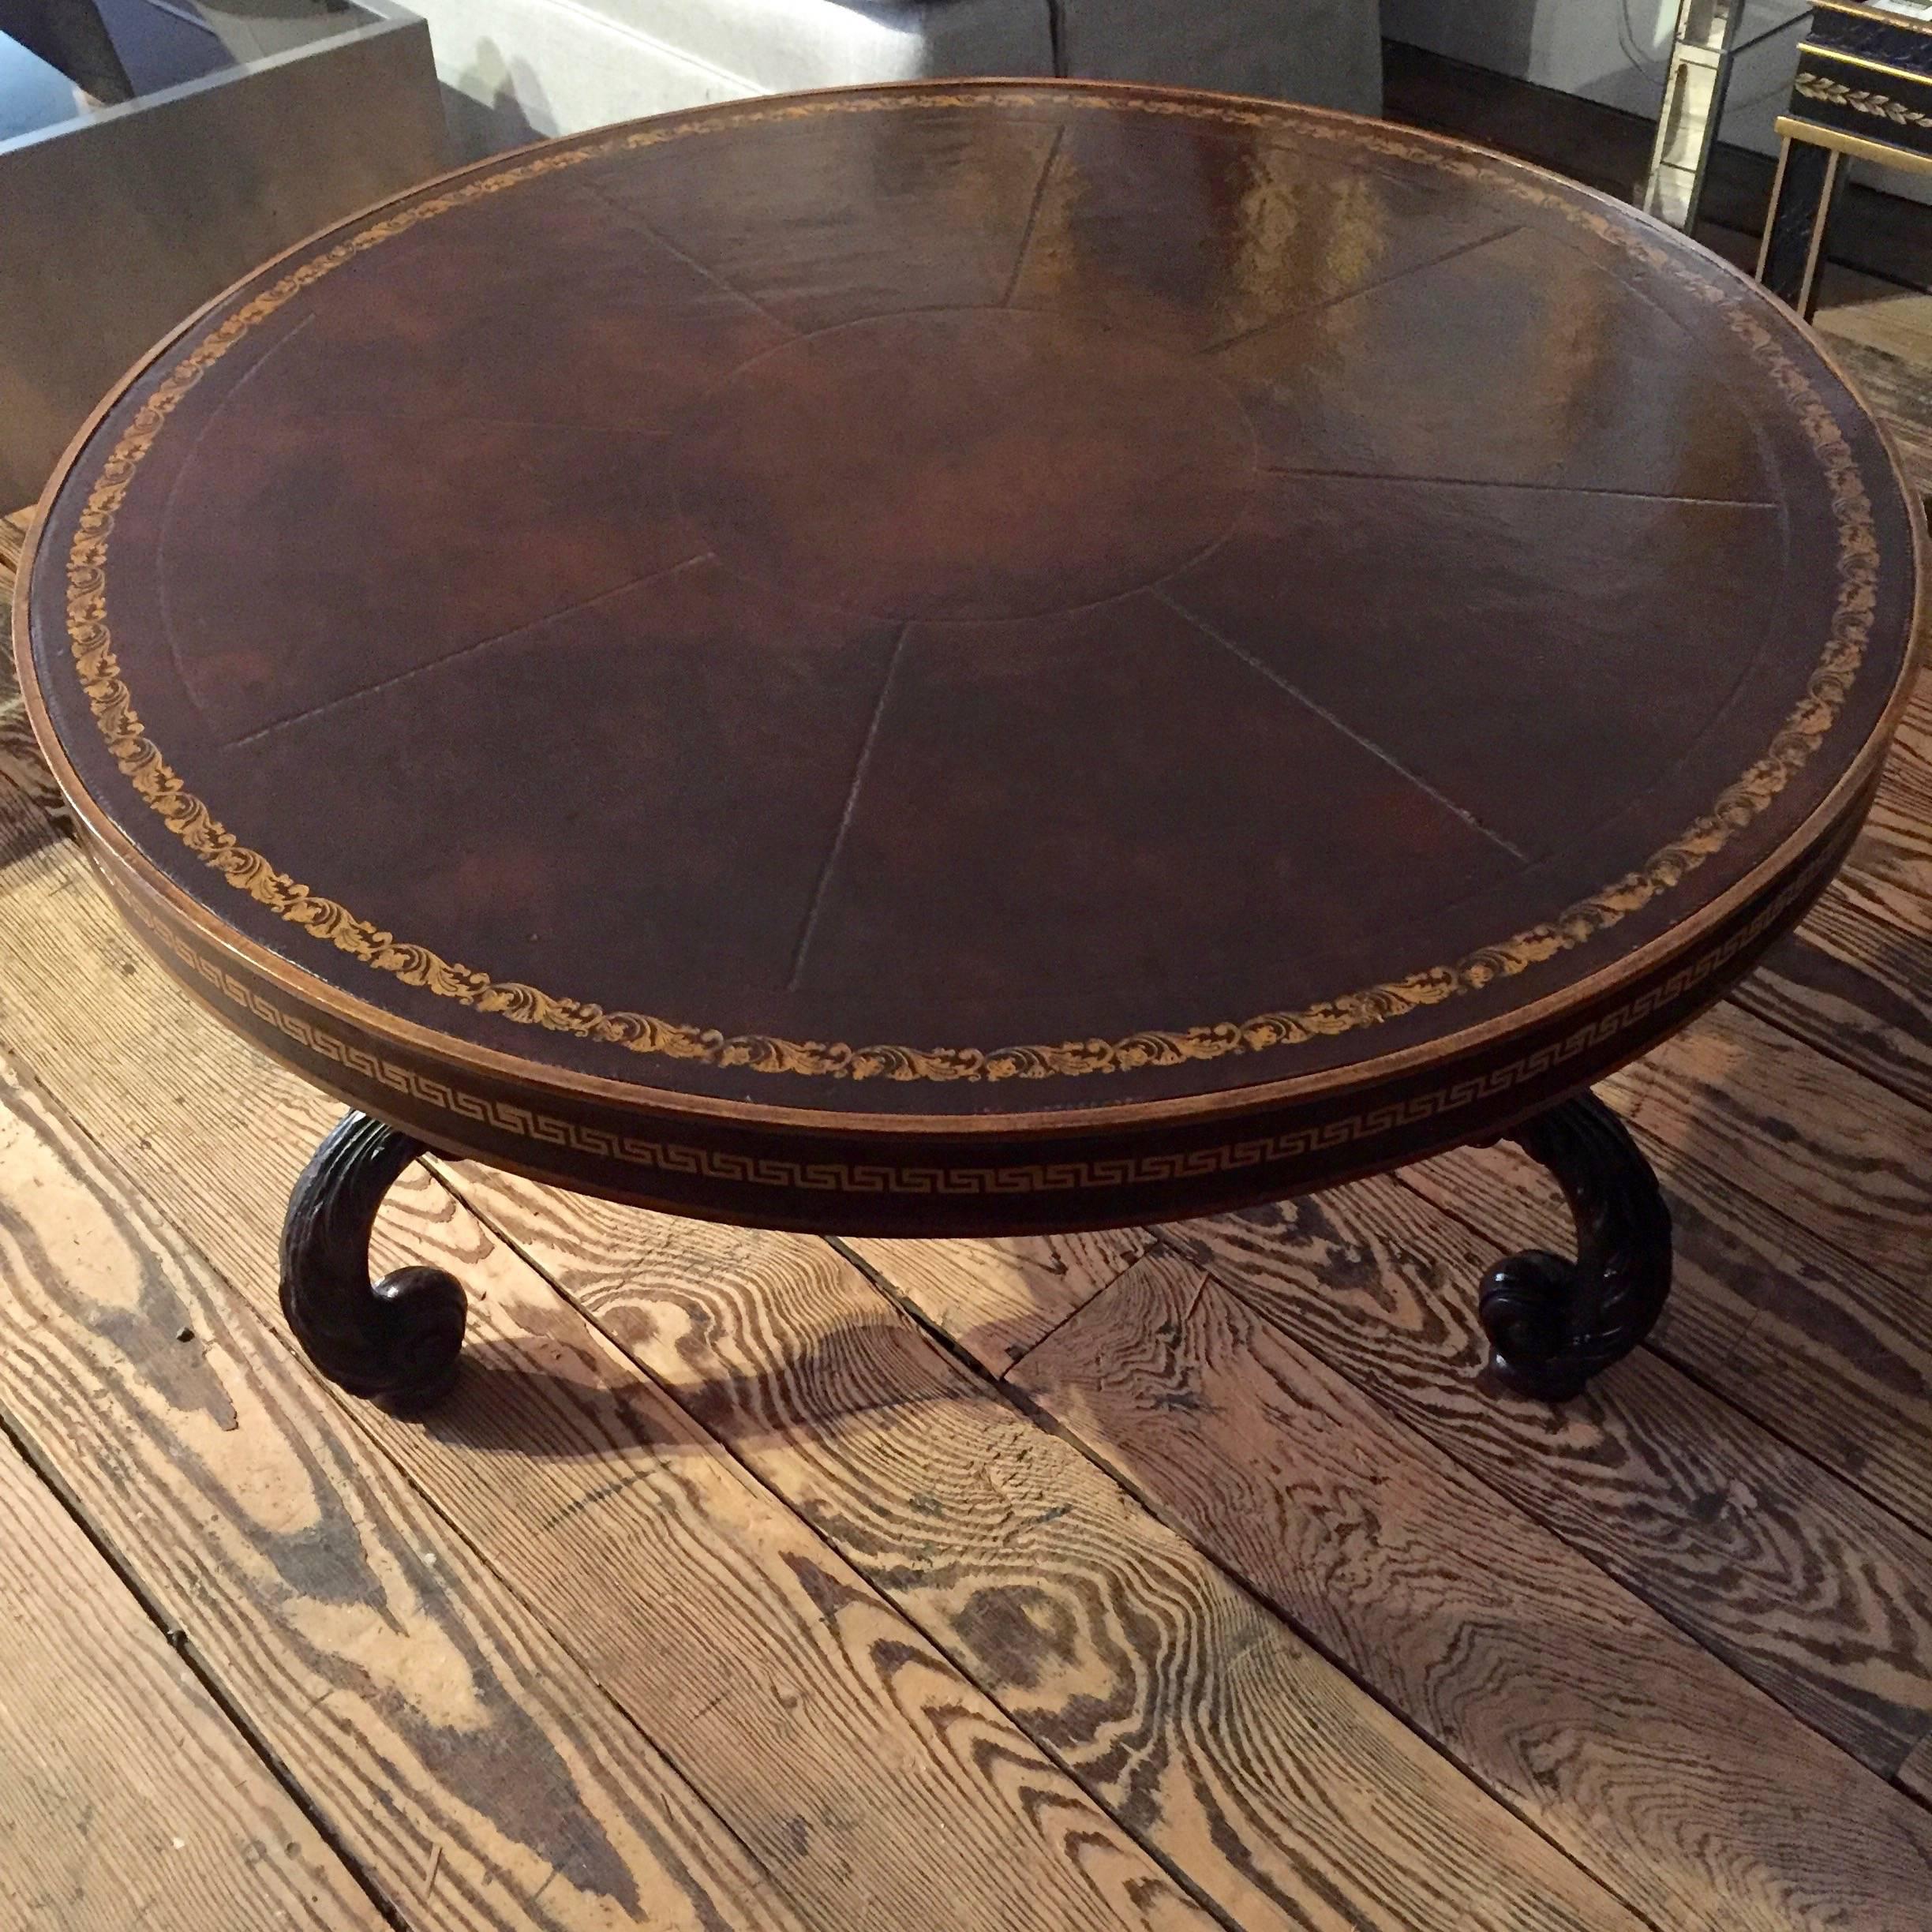 Great looking round coffee table having a stunning tooled leather top with gold embossed design on the periphery and fabulous Greek key decoration on the sides. Base is carved wood with three curvy legs. The top and bottom may not be original to one